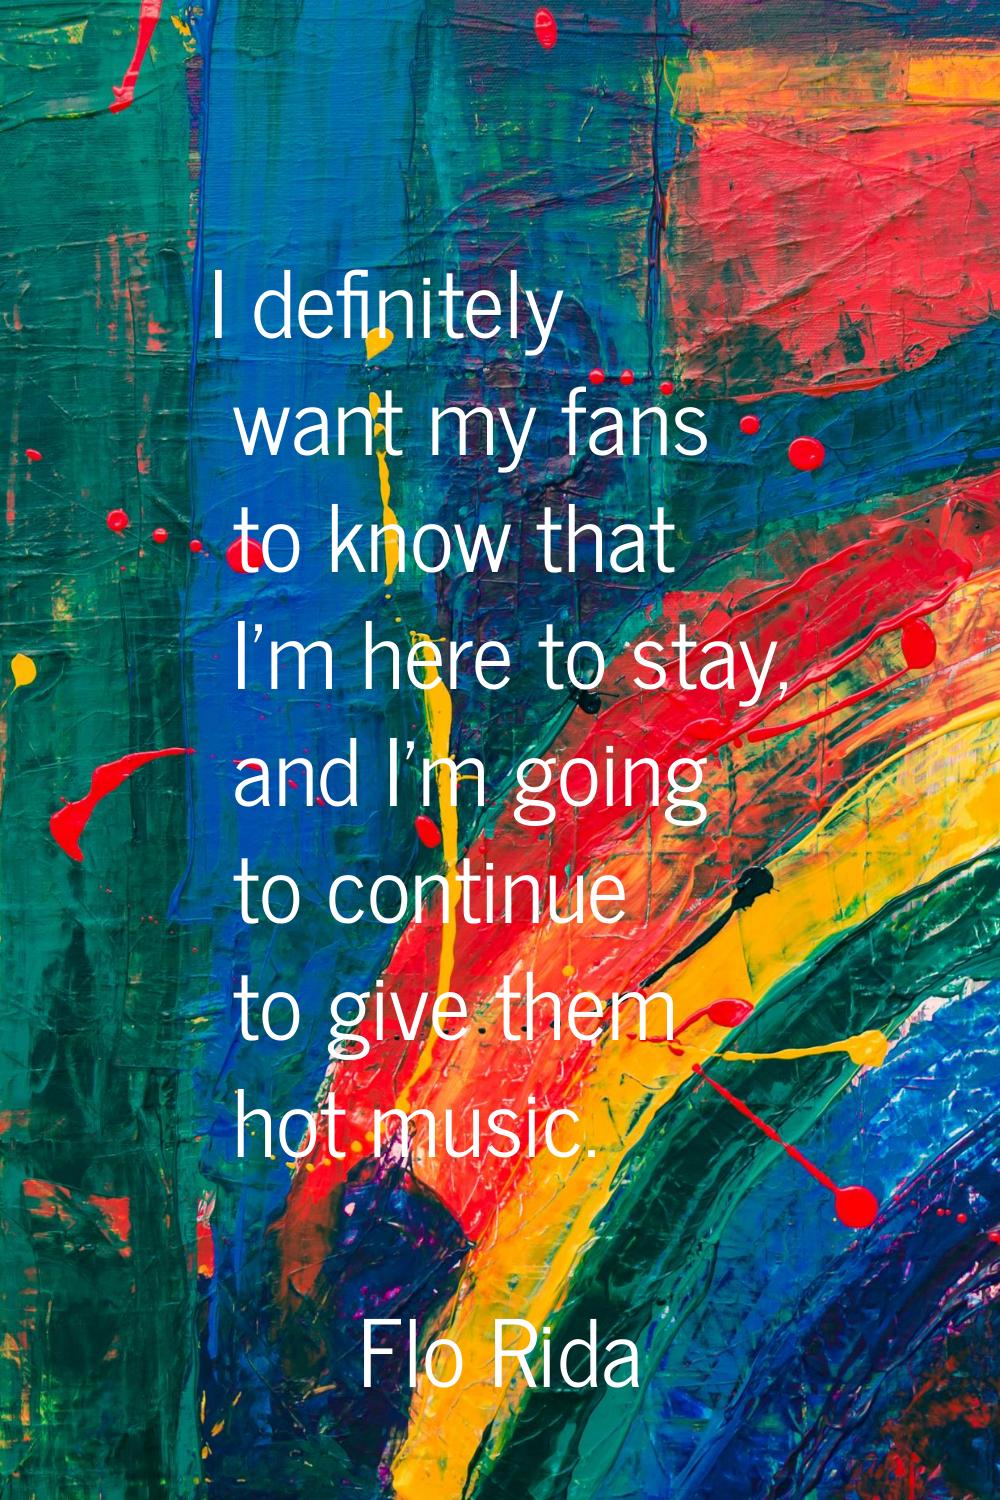 I definitely want my fans to know that I'm here to stay, and I'm going to continue to give them hot